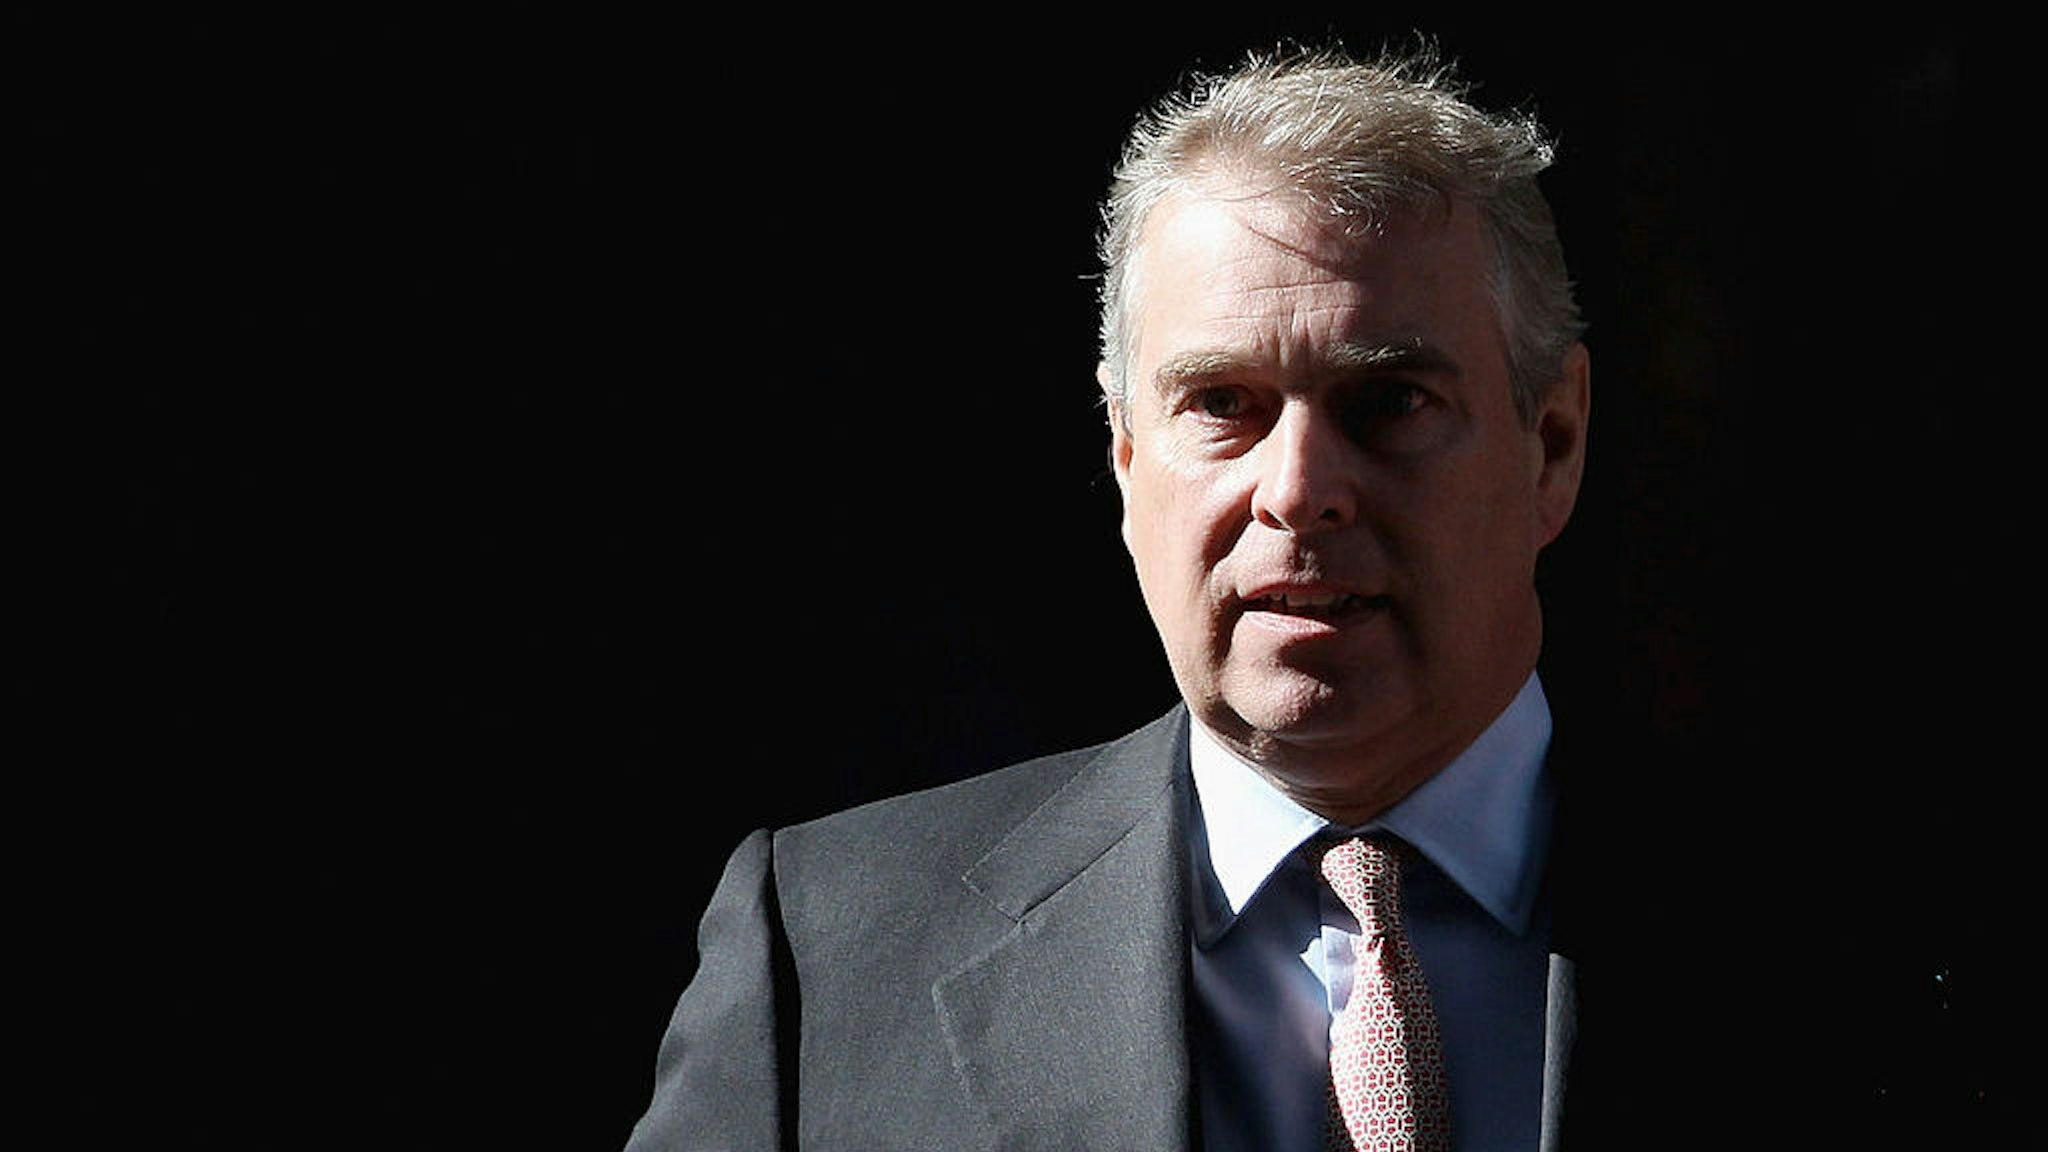 LONDON, ENGLAND - MARCH 07: The Duke of York leaves the Headquarters of CrossRail in Canary Wharf on March 7, 2011 in London, England. Prince Andrew is under increasing pressure after a series of damaging revelations about him, including criticism over his friendship with convicted sex offender Jeffrey Epstein, an American financier surfaced. (Photo by Dan Kitwood/Getty Images)